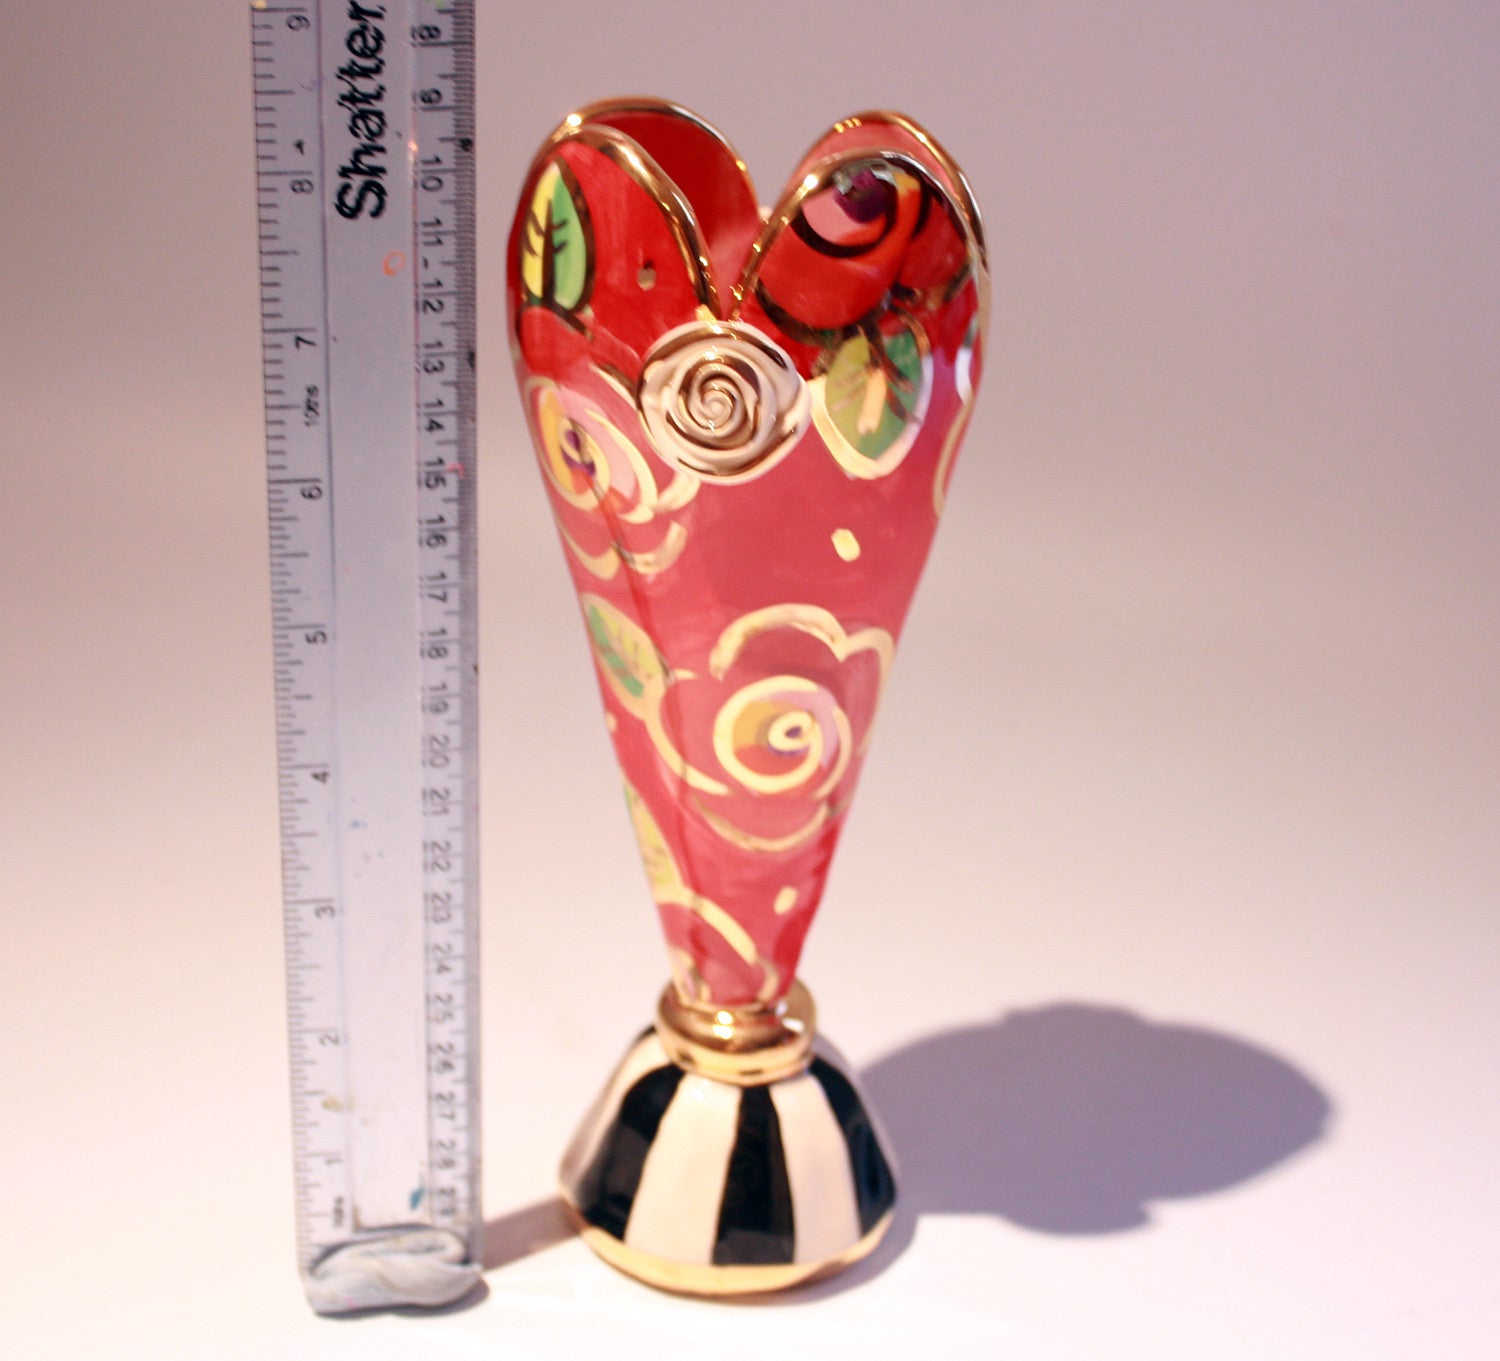 Tiny Heart Vase "New Red New Rose" - MaryRoseYoung